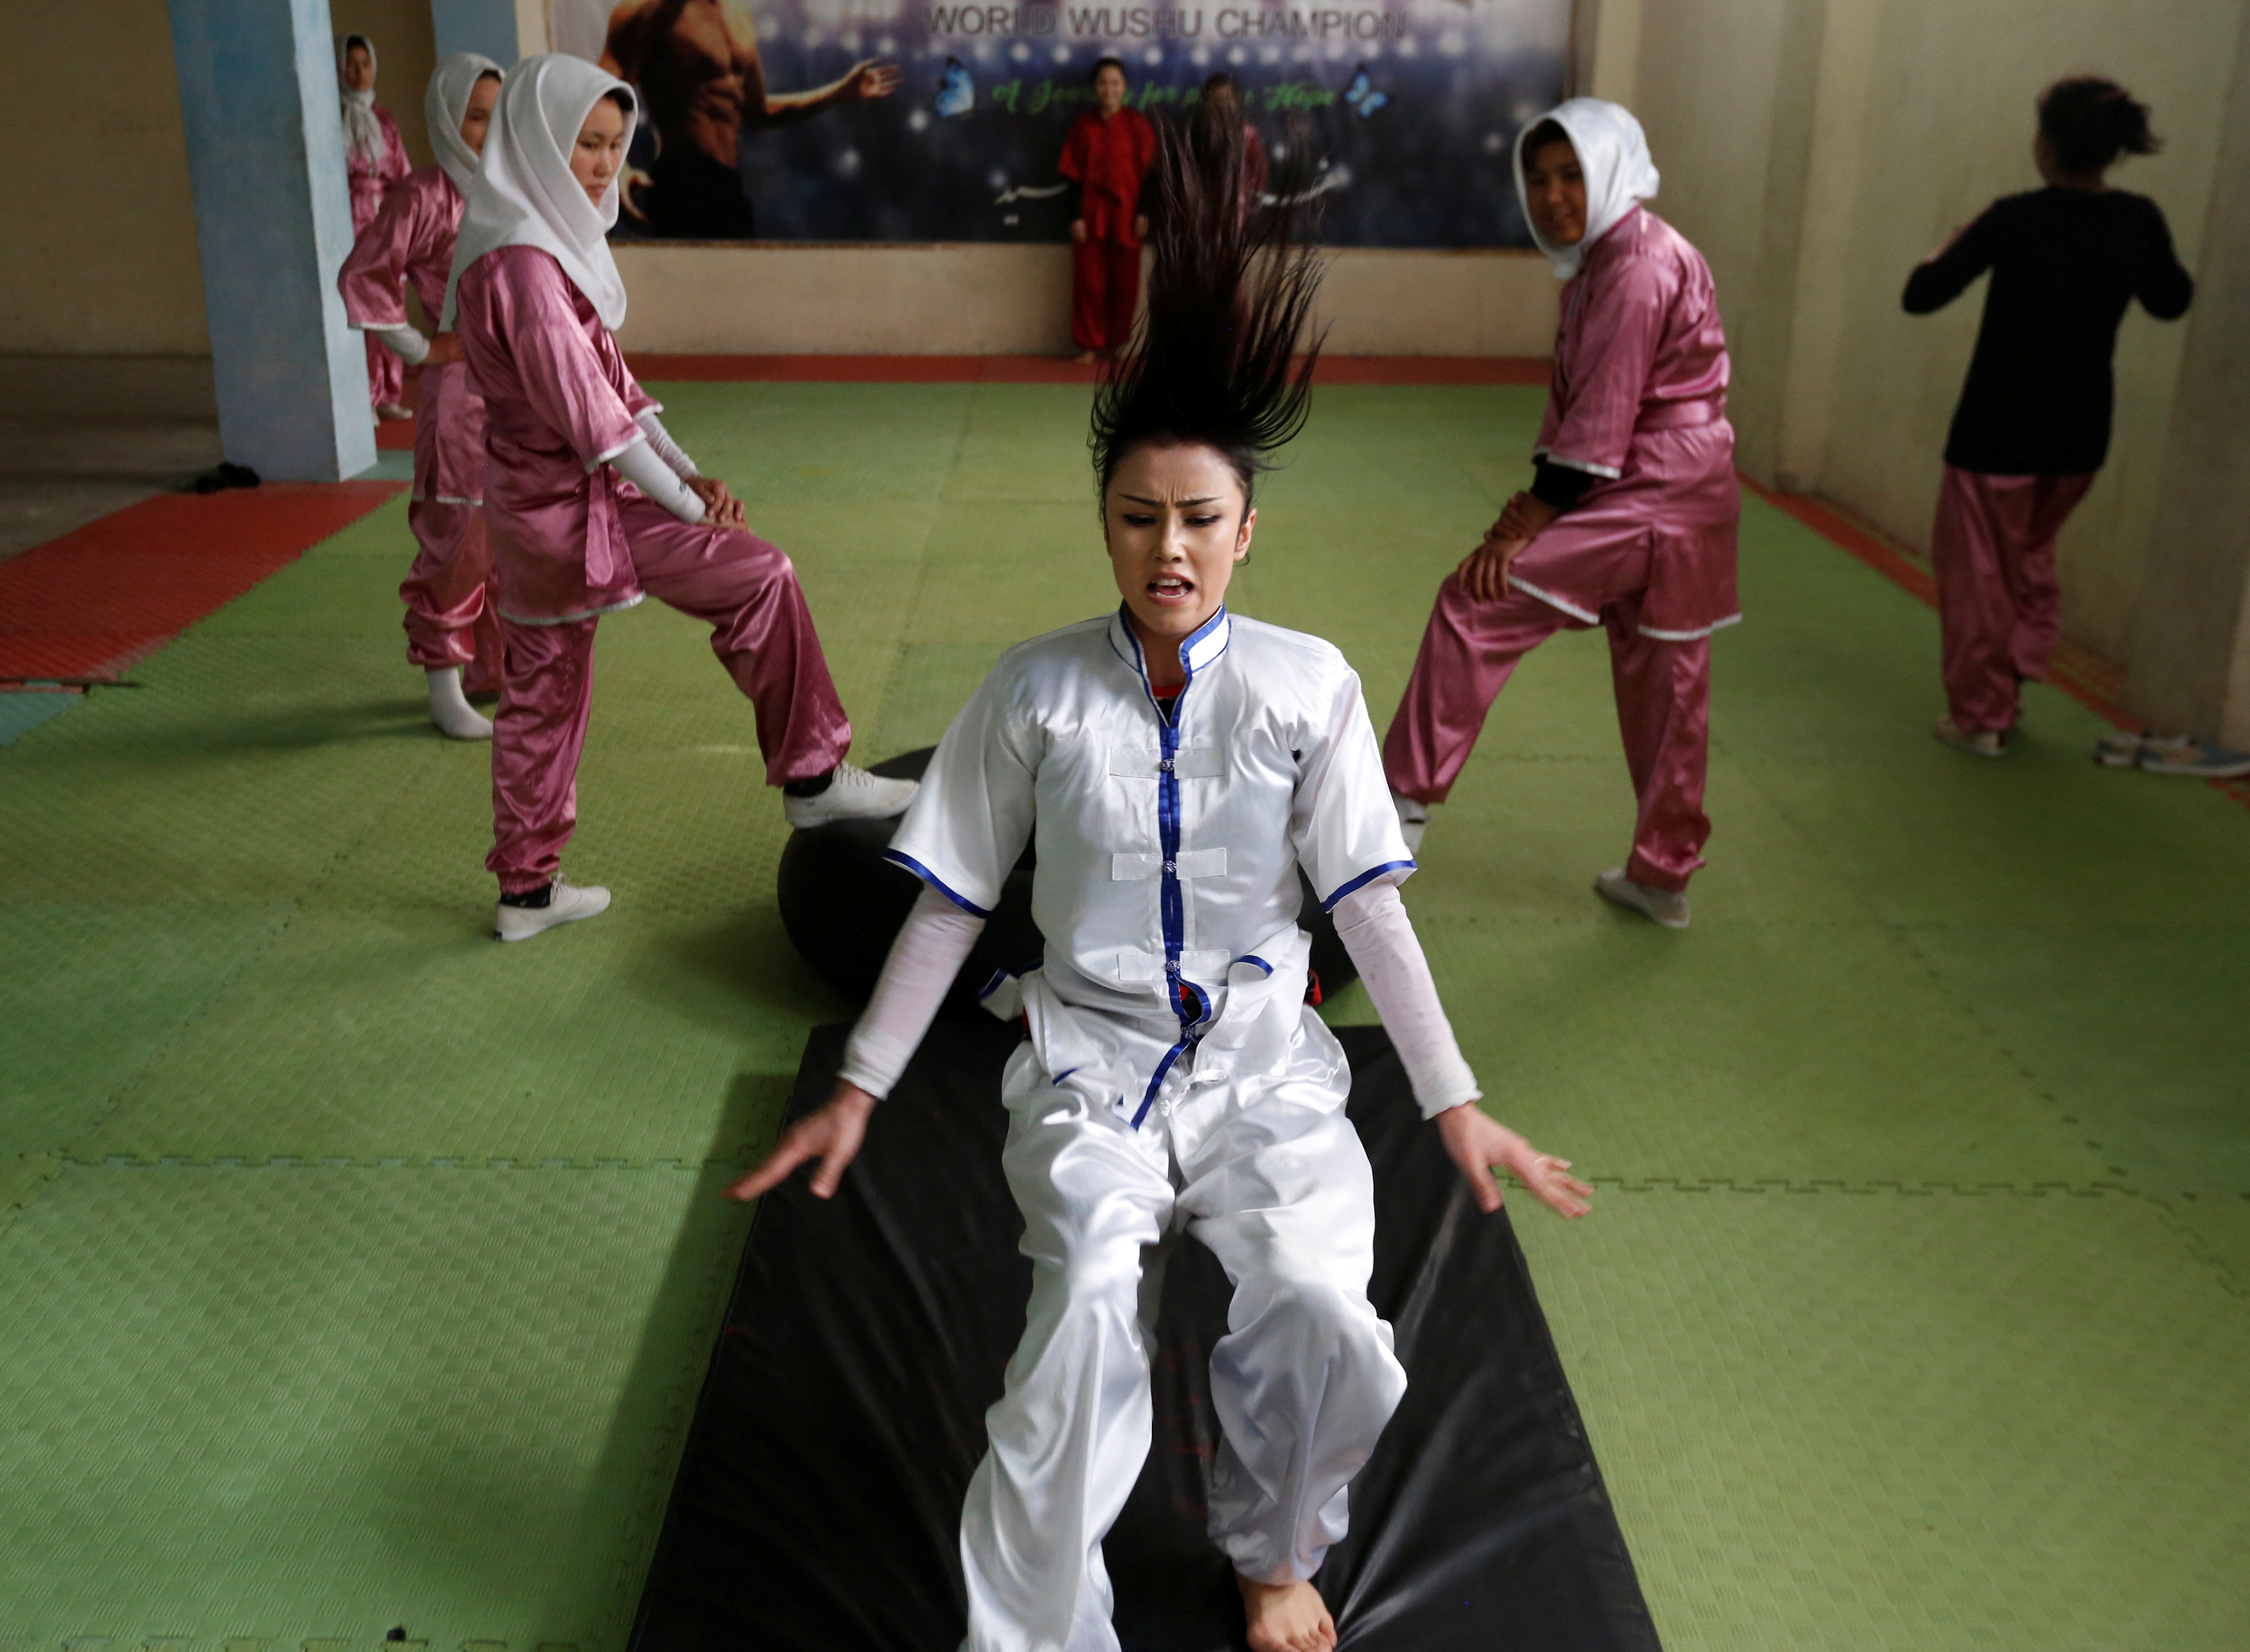 Sabera Bayanne, 20, a student of the Shaolin Wushu club, practices in Kabul, Afghanistan January 29, 2017. REUTERS/Mohammad Ismail